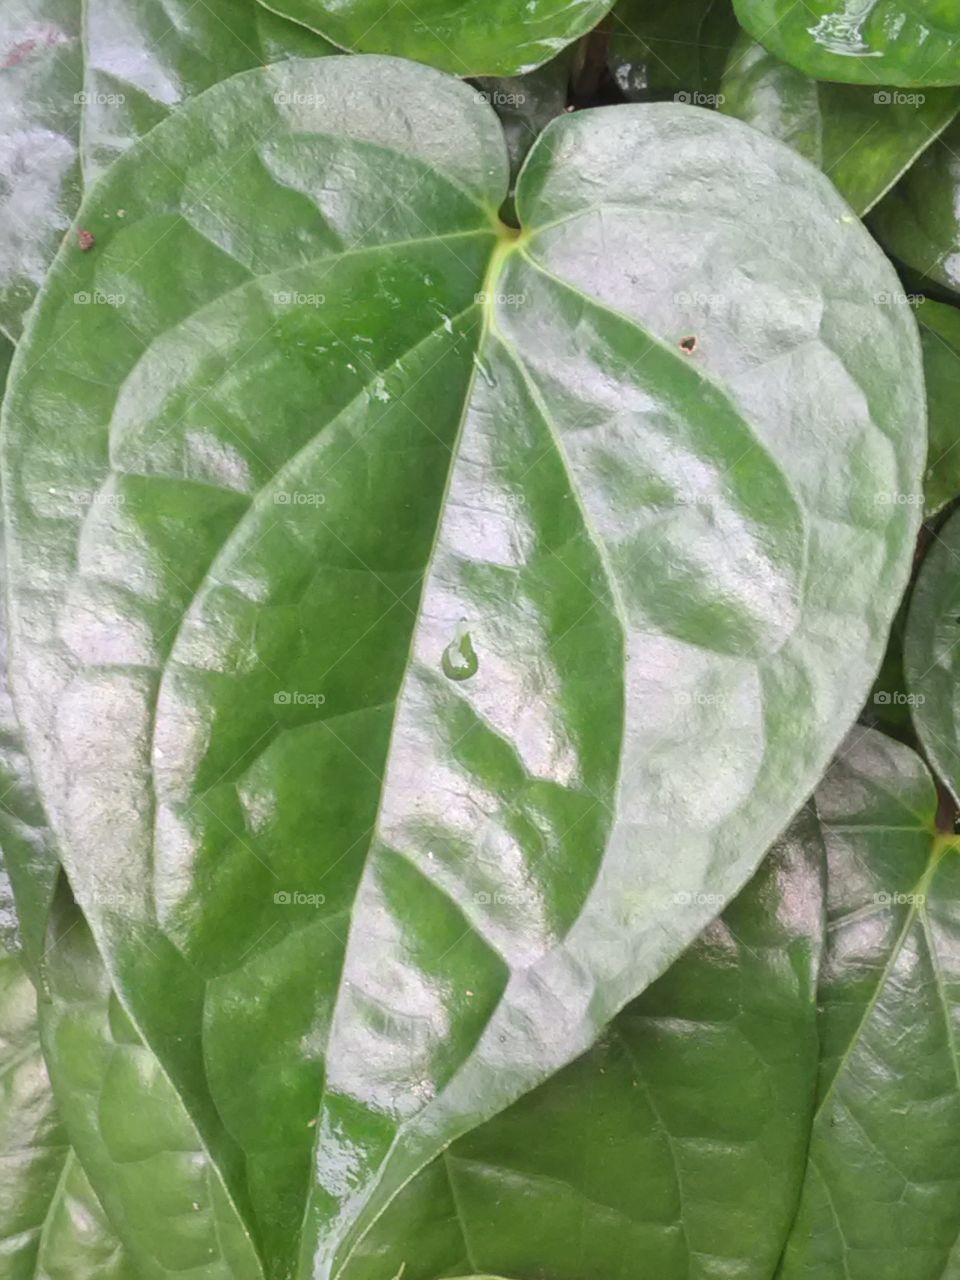 The betel leaf is eating Indians they are called 'मीठा पान'.